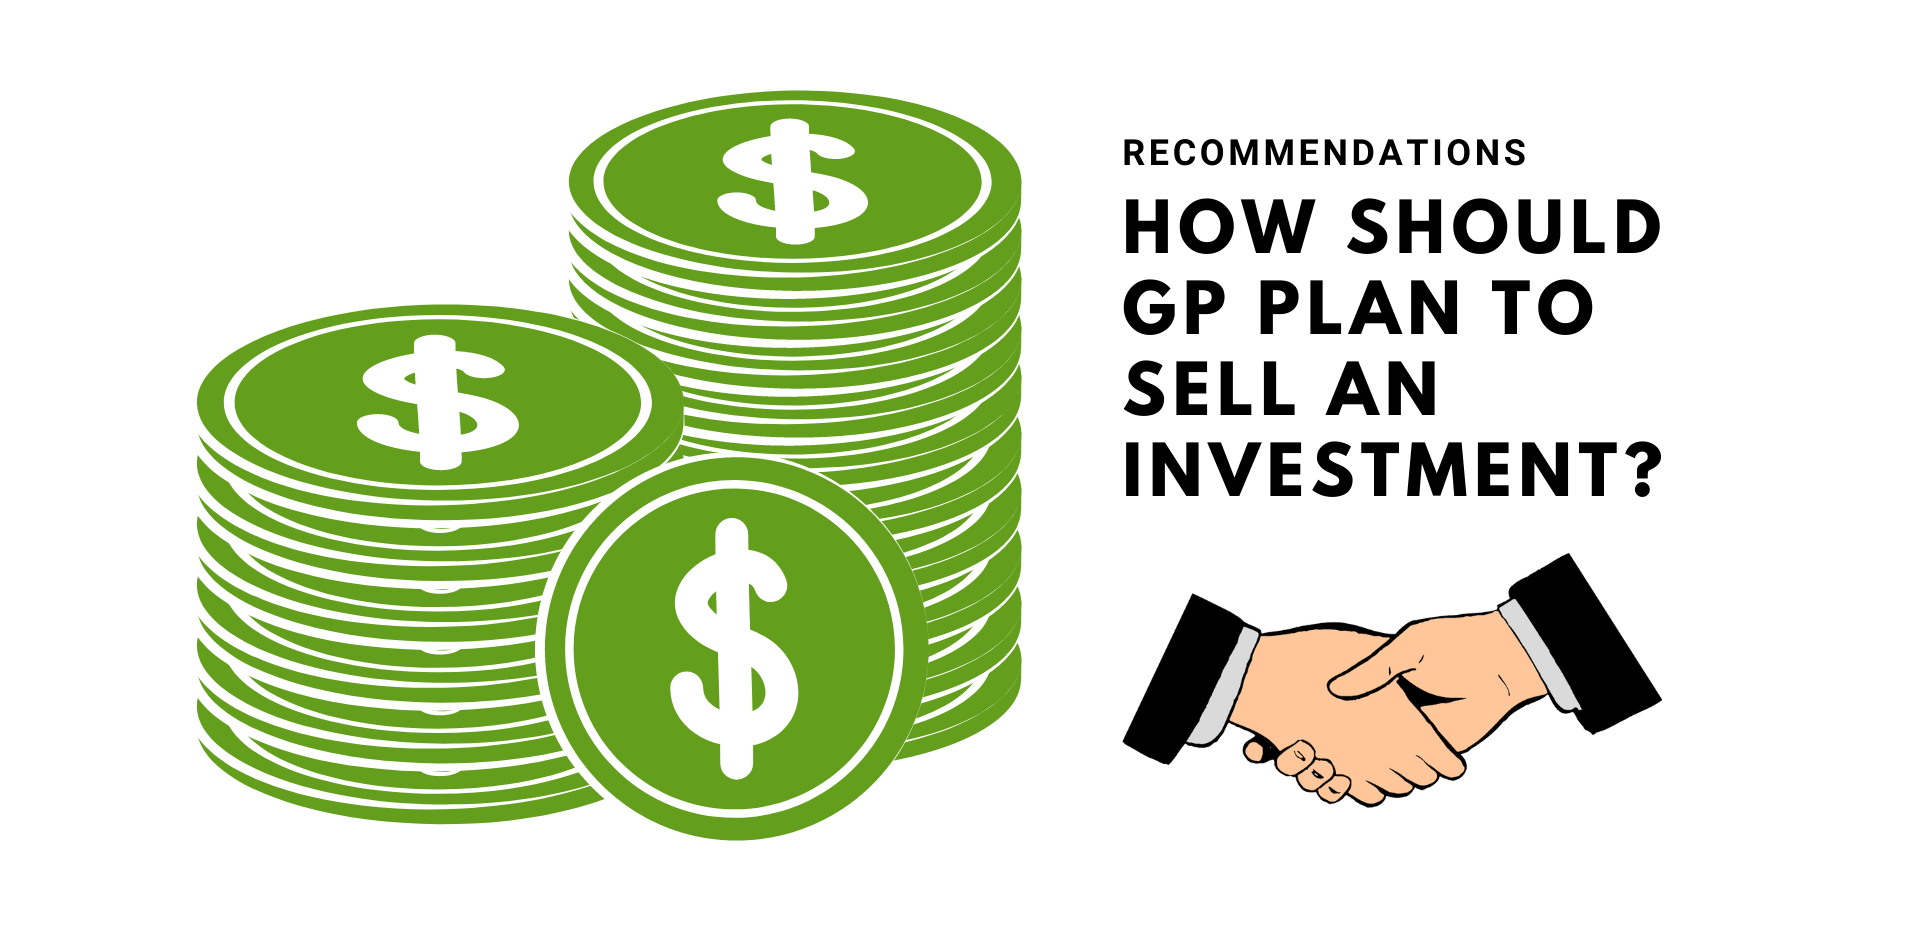 How Should GP Plan to Sell an Investment?